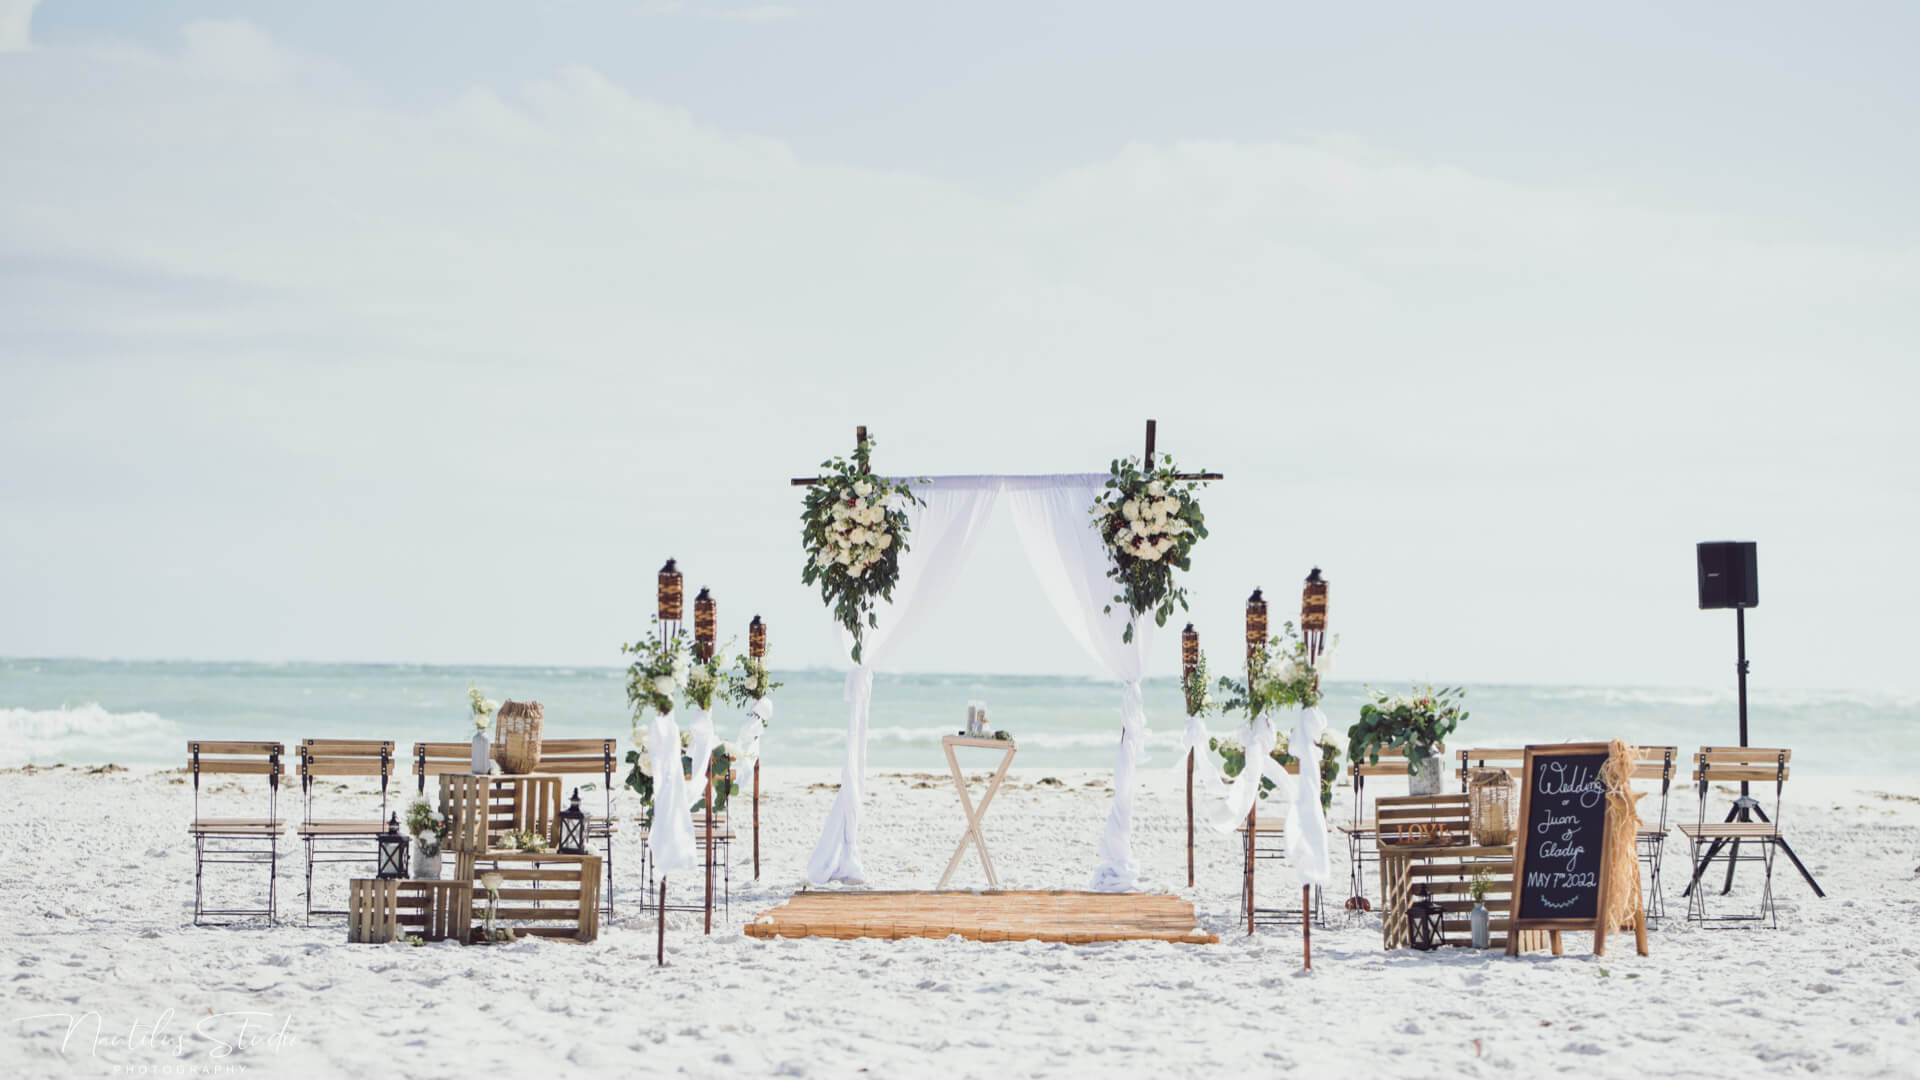 Lifestyle vintage beach wedding decoration with fresh flowers and French Country chairs for guests